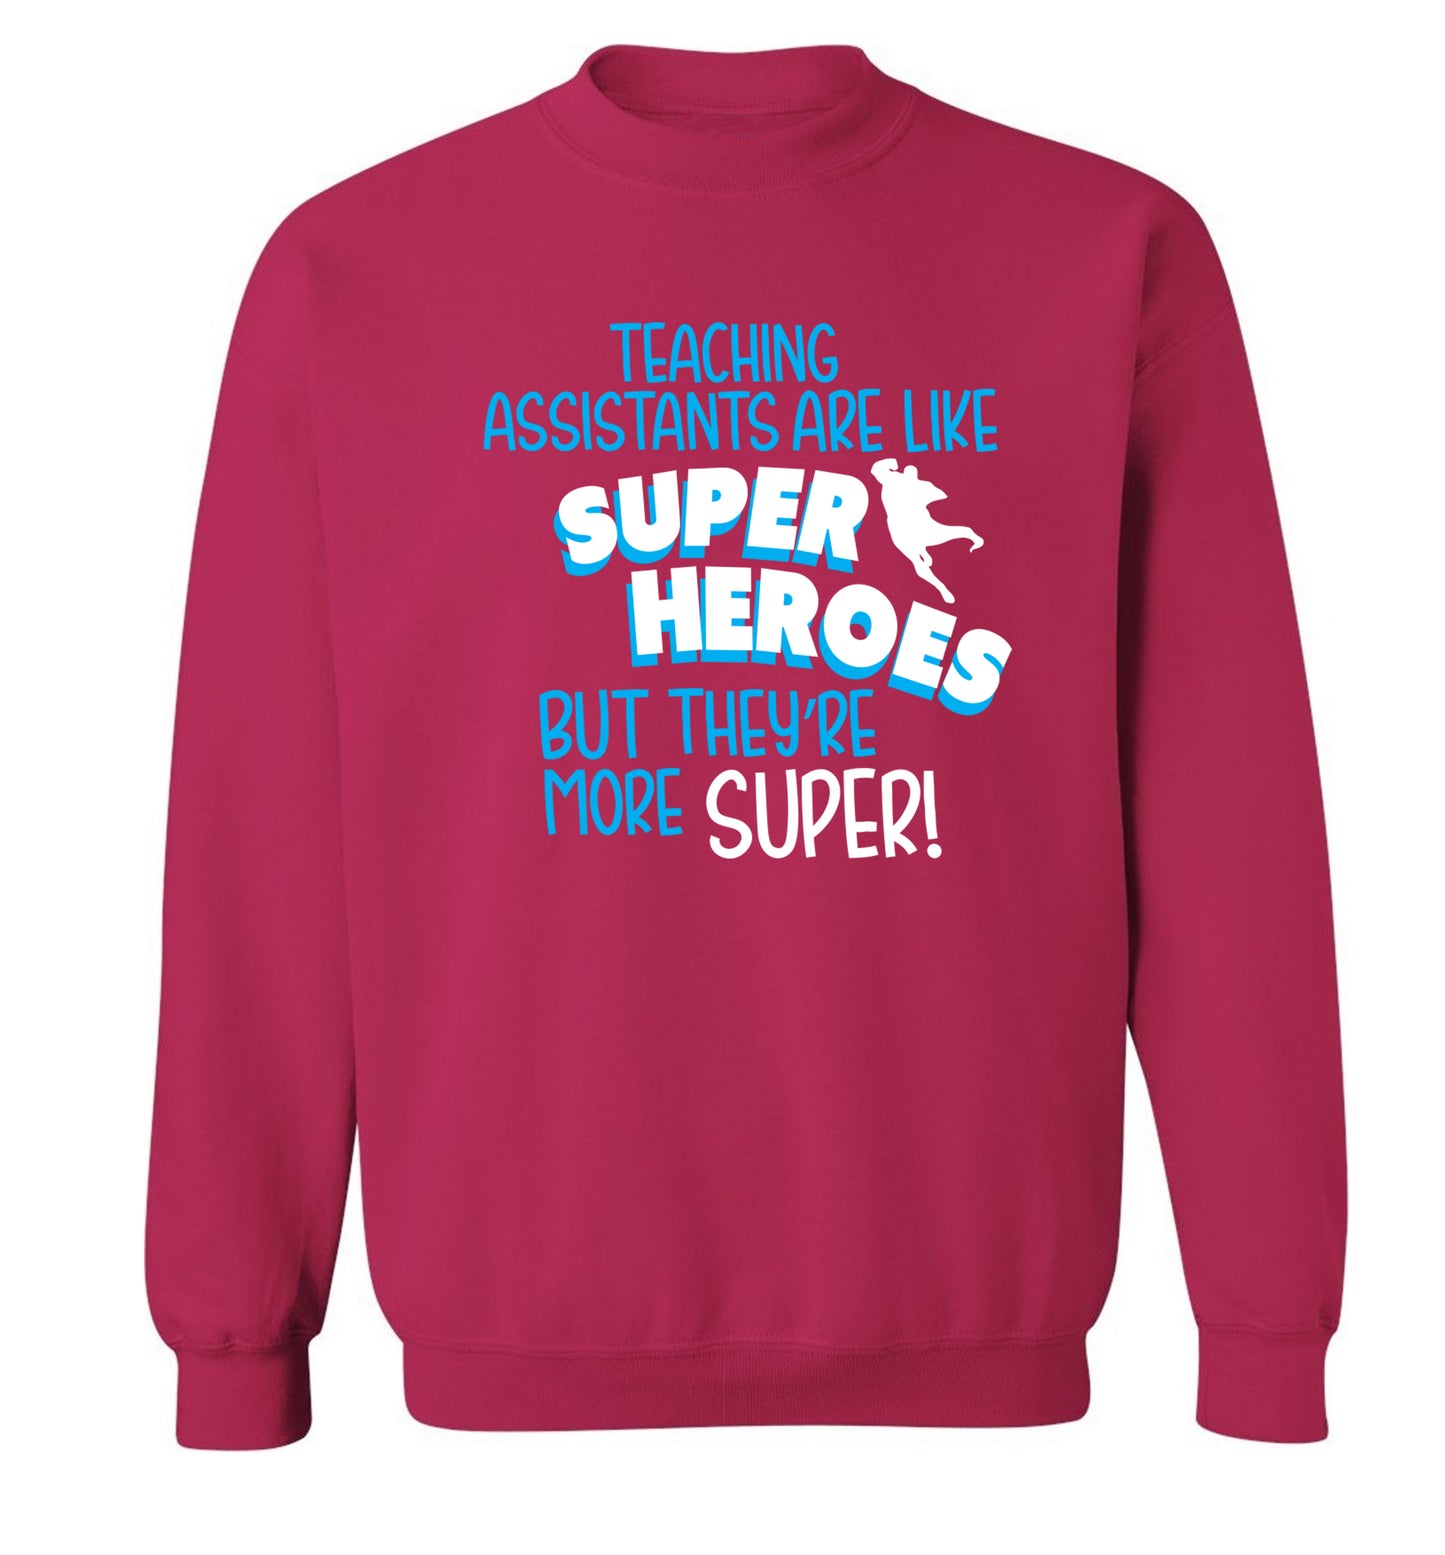 Teaching assistants are like superheros but they're more super Adult's unisex pink Sweater 2XL